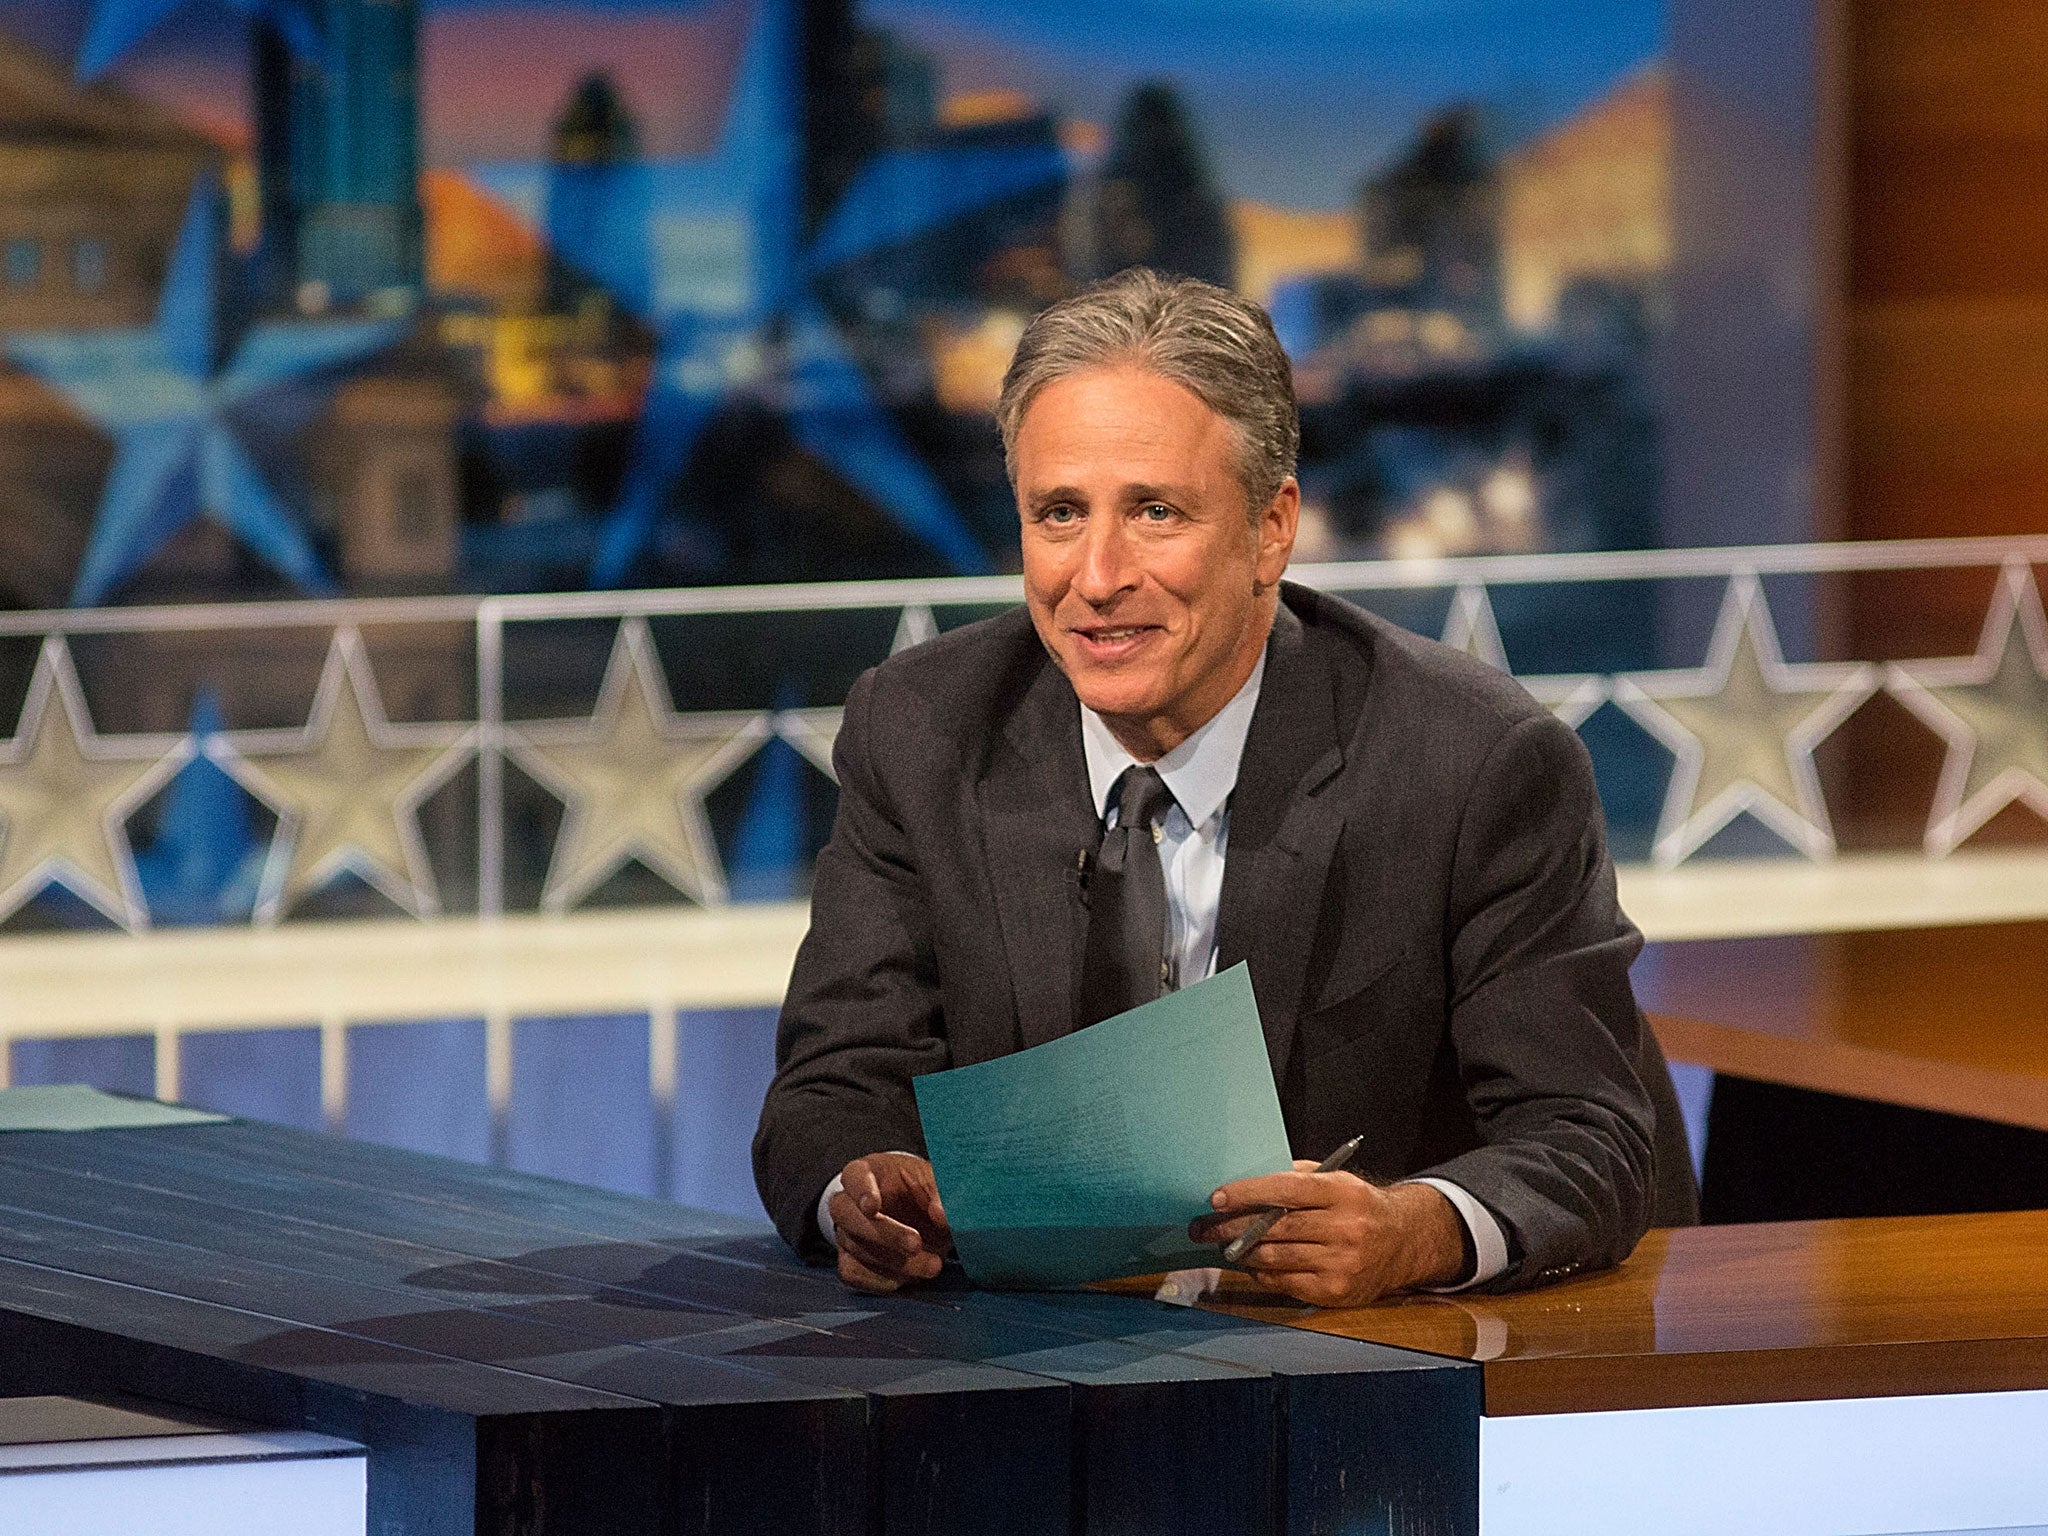 A comedy show alumni who has gone on to be a big star, Jon Stewart